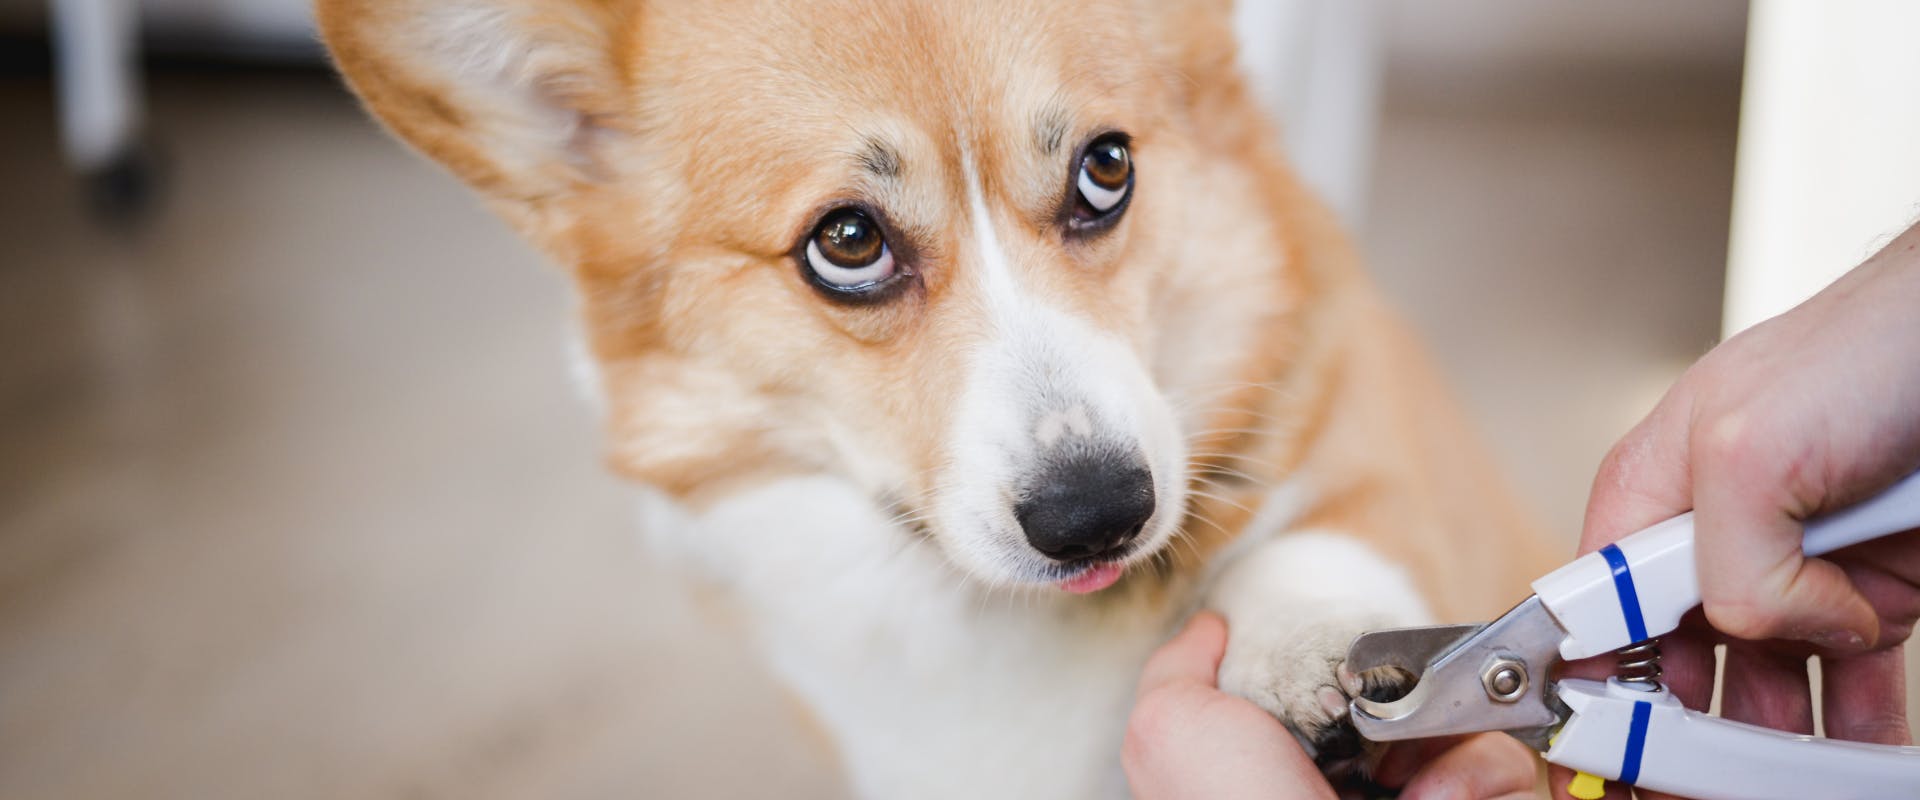 a corgi looking up a the human who is using nail clippers for dog nail clipping